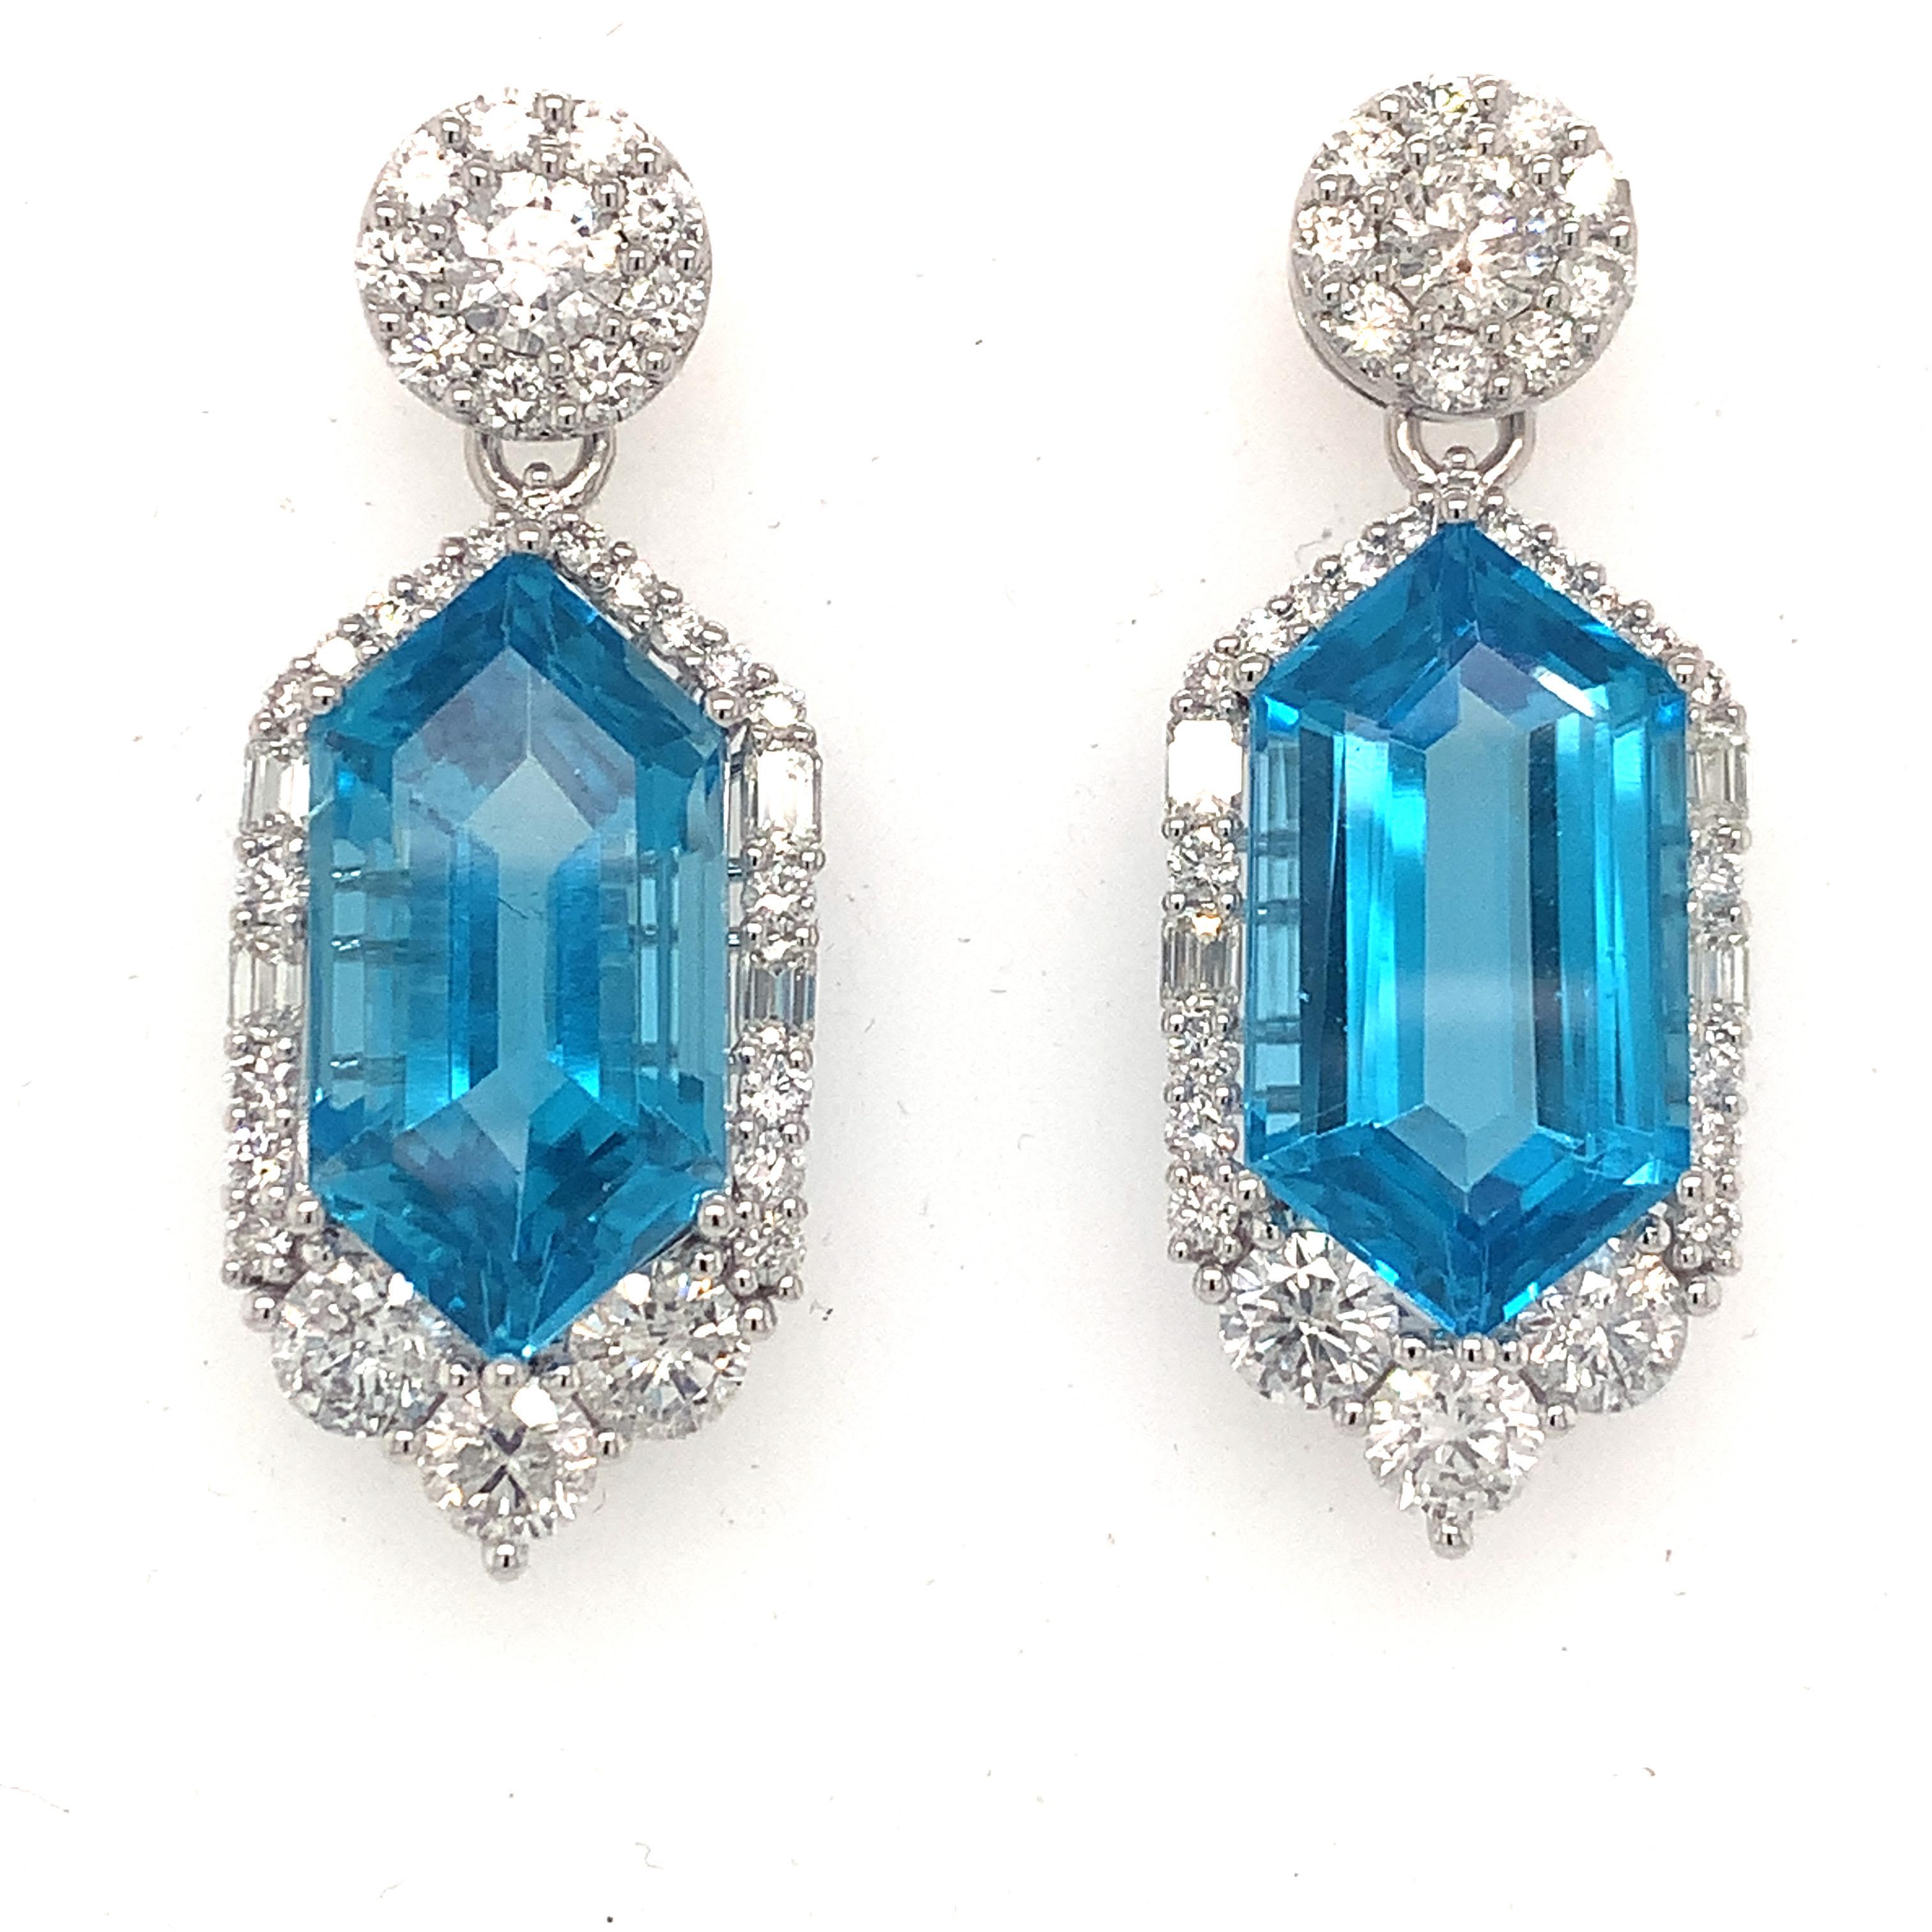 Spectacular radiance of 30.29 carat Swiss Blue Topaz is framed by a glistening diamond halo which makes this dangle earrings a glamorous creation. Diamond halo has a unique combination of different cut and sizes of diamonds. It has screw back studs